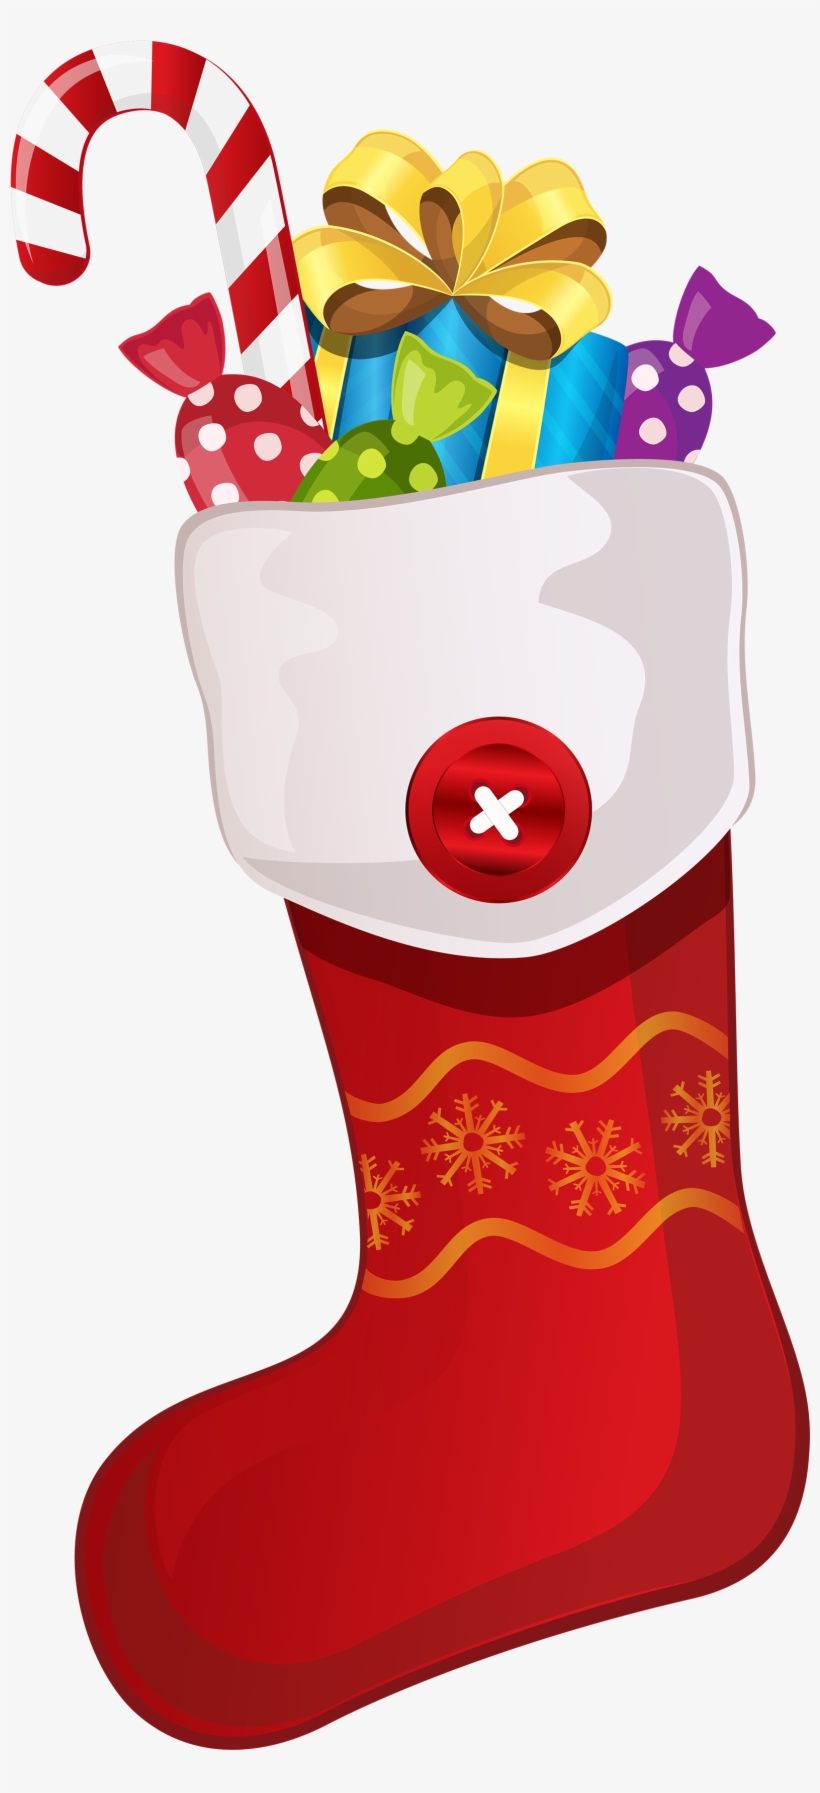 Red Christmas Stocking With Candy Cane Png Clipart - Christmas Clipart, transparent png #8580